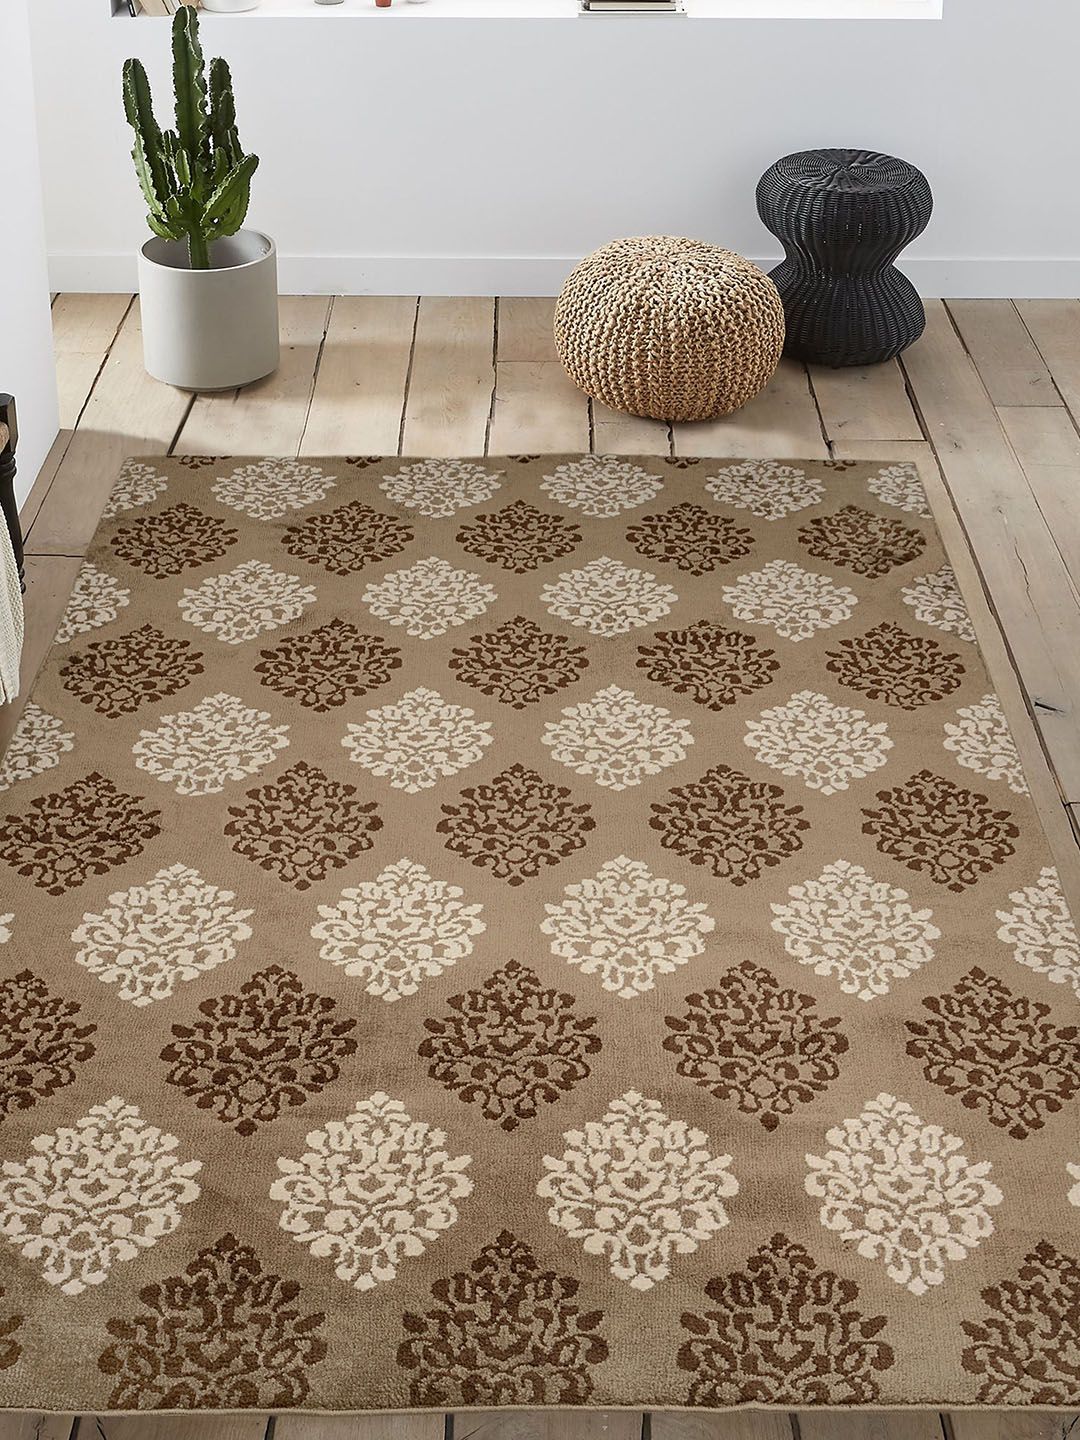 Saral Home Brown & Beige Woven Design Anti-Skid Carpet Price in India